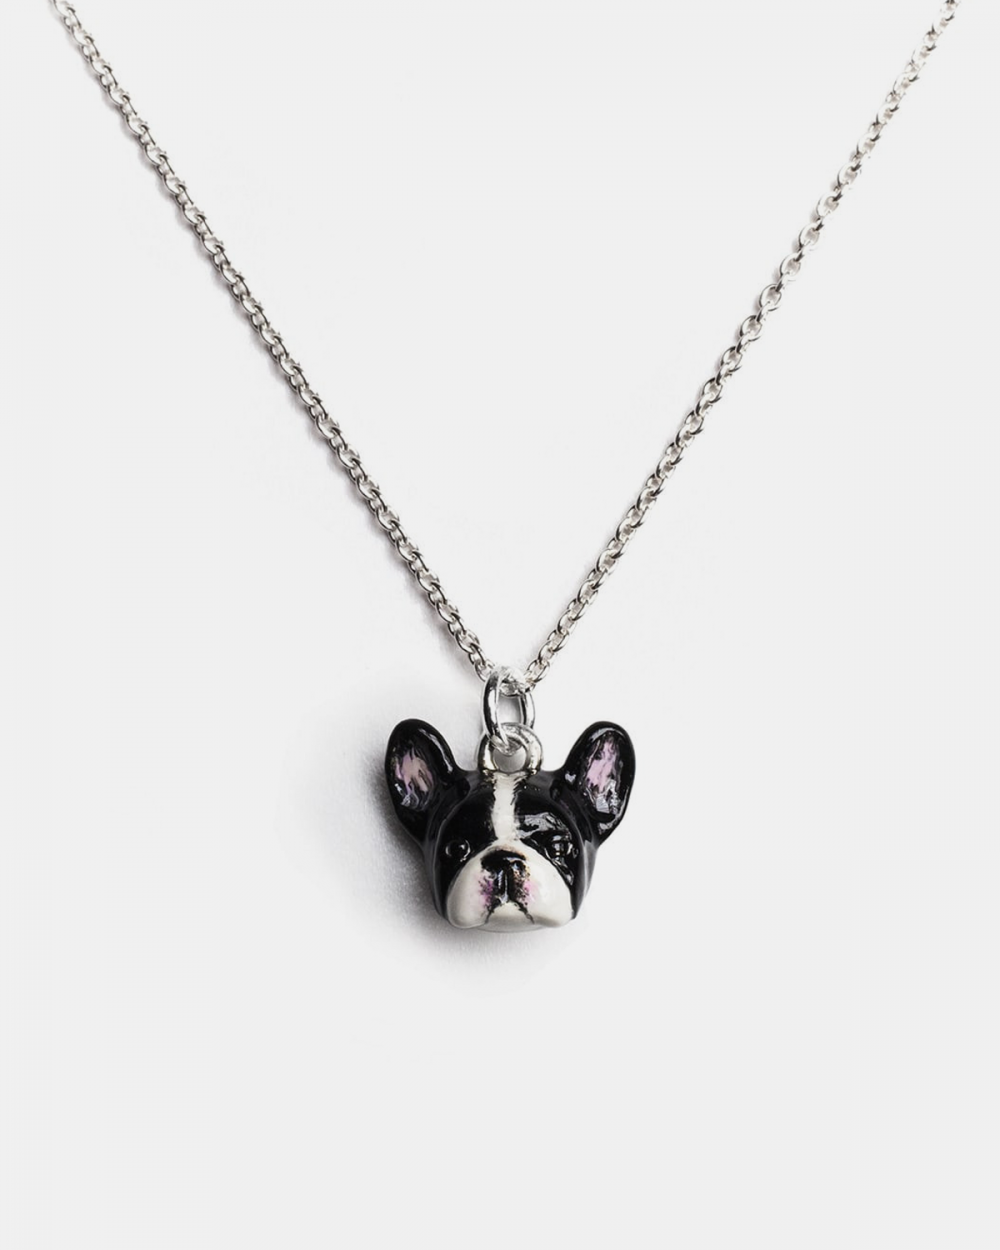 925 Sterling Silver French Bulldog Pendant Necklace Chain Included